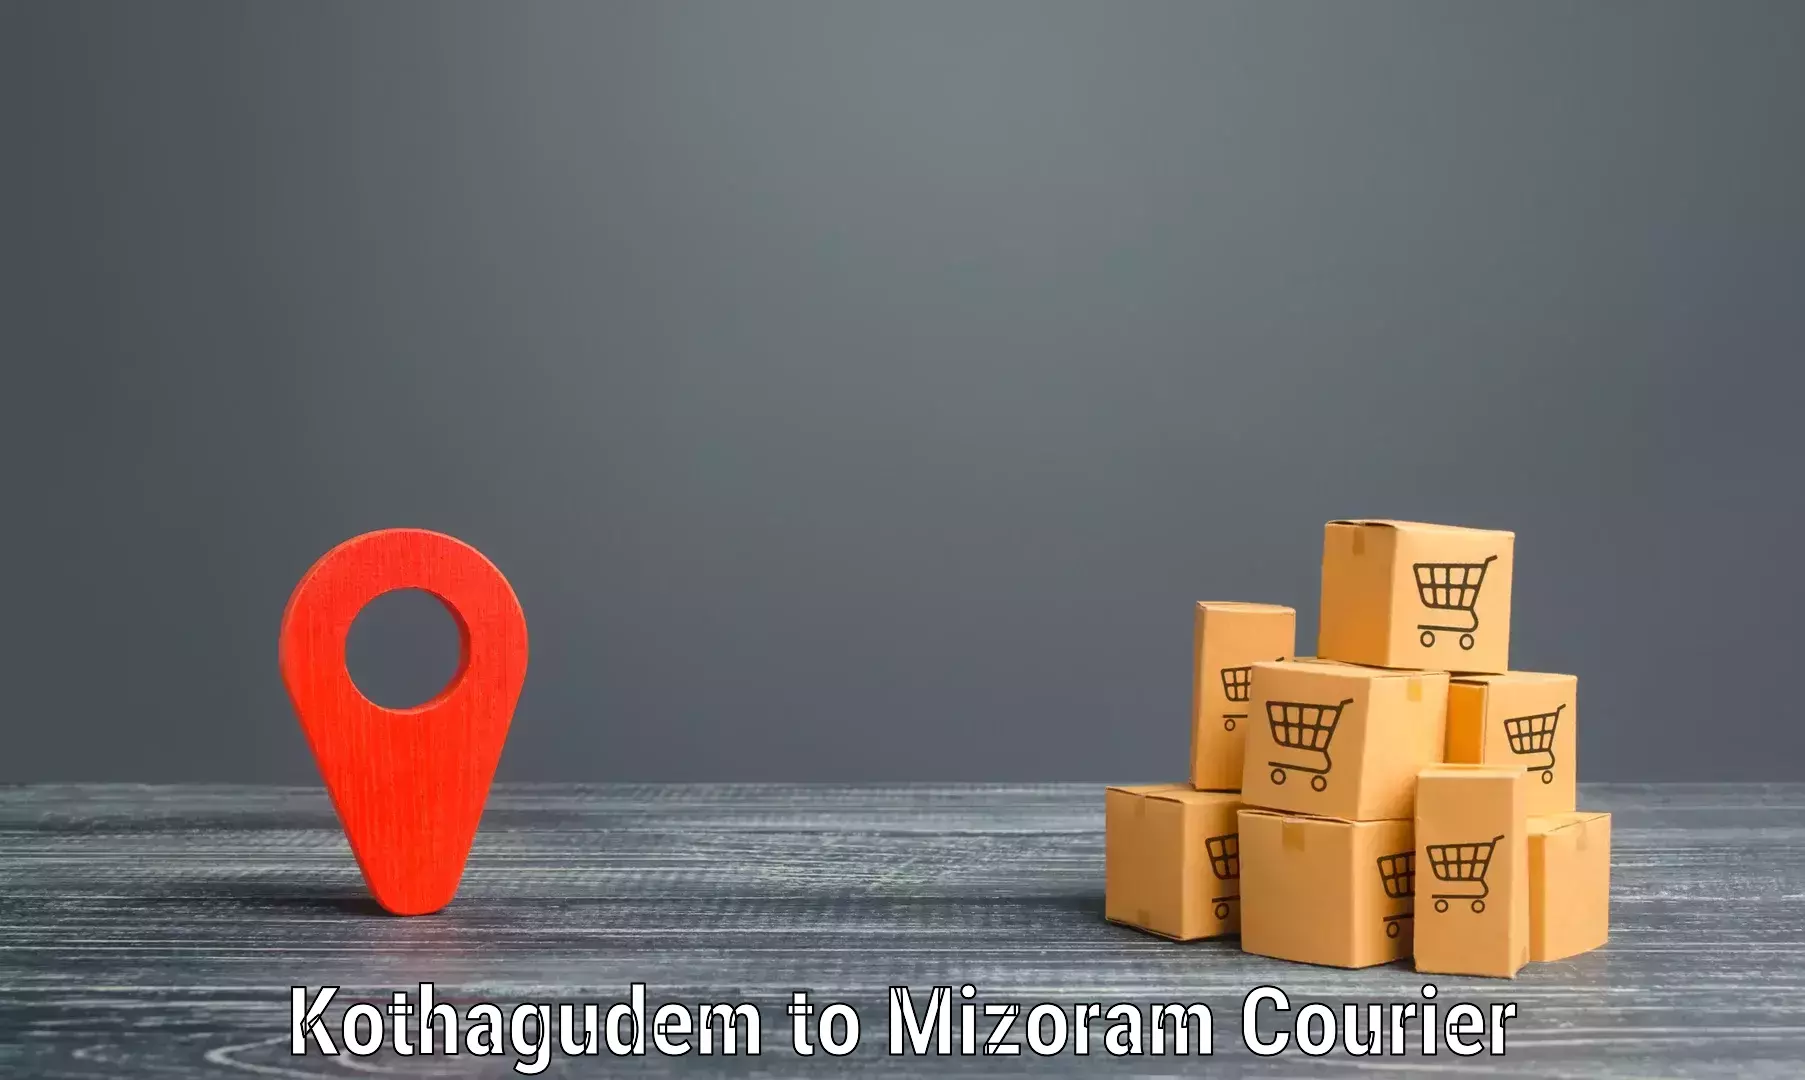 Cargo delivery service Kothagudem to Siaha